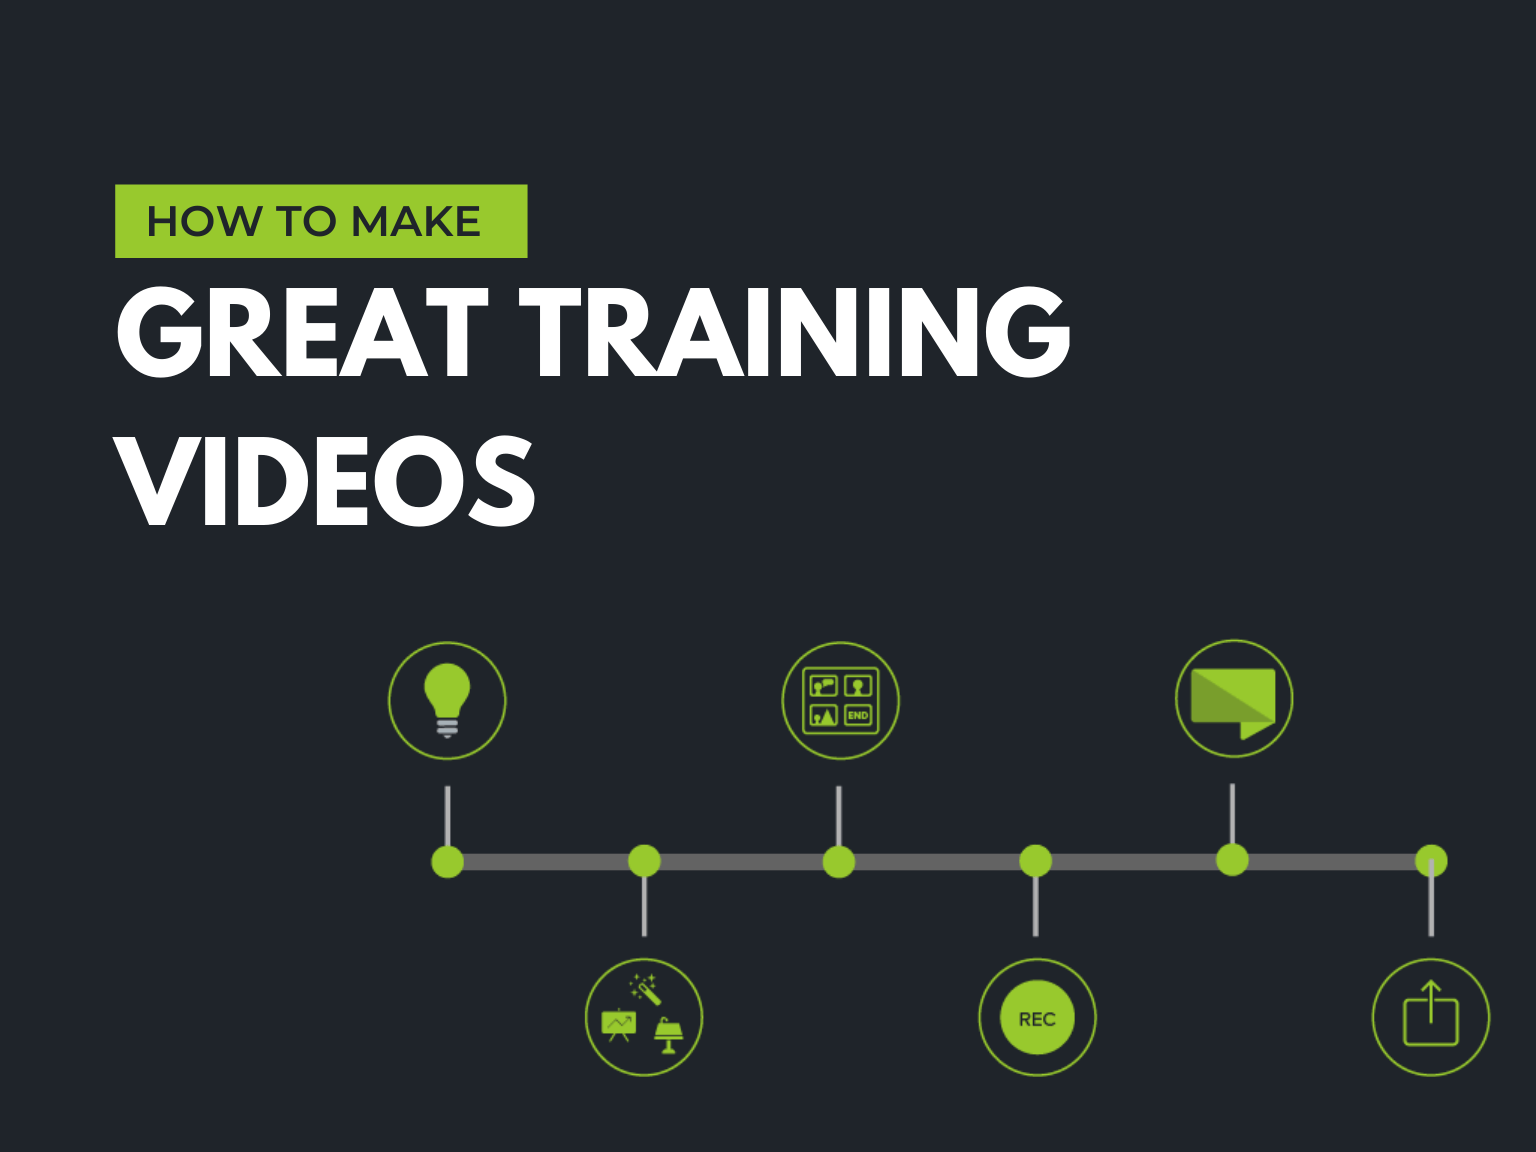 How to Make Great Training Videos? | The TechSmith Blog